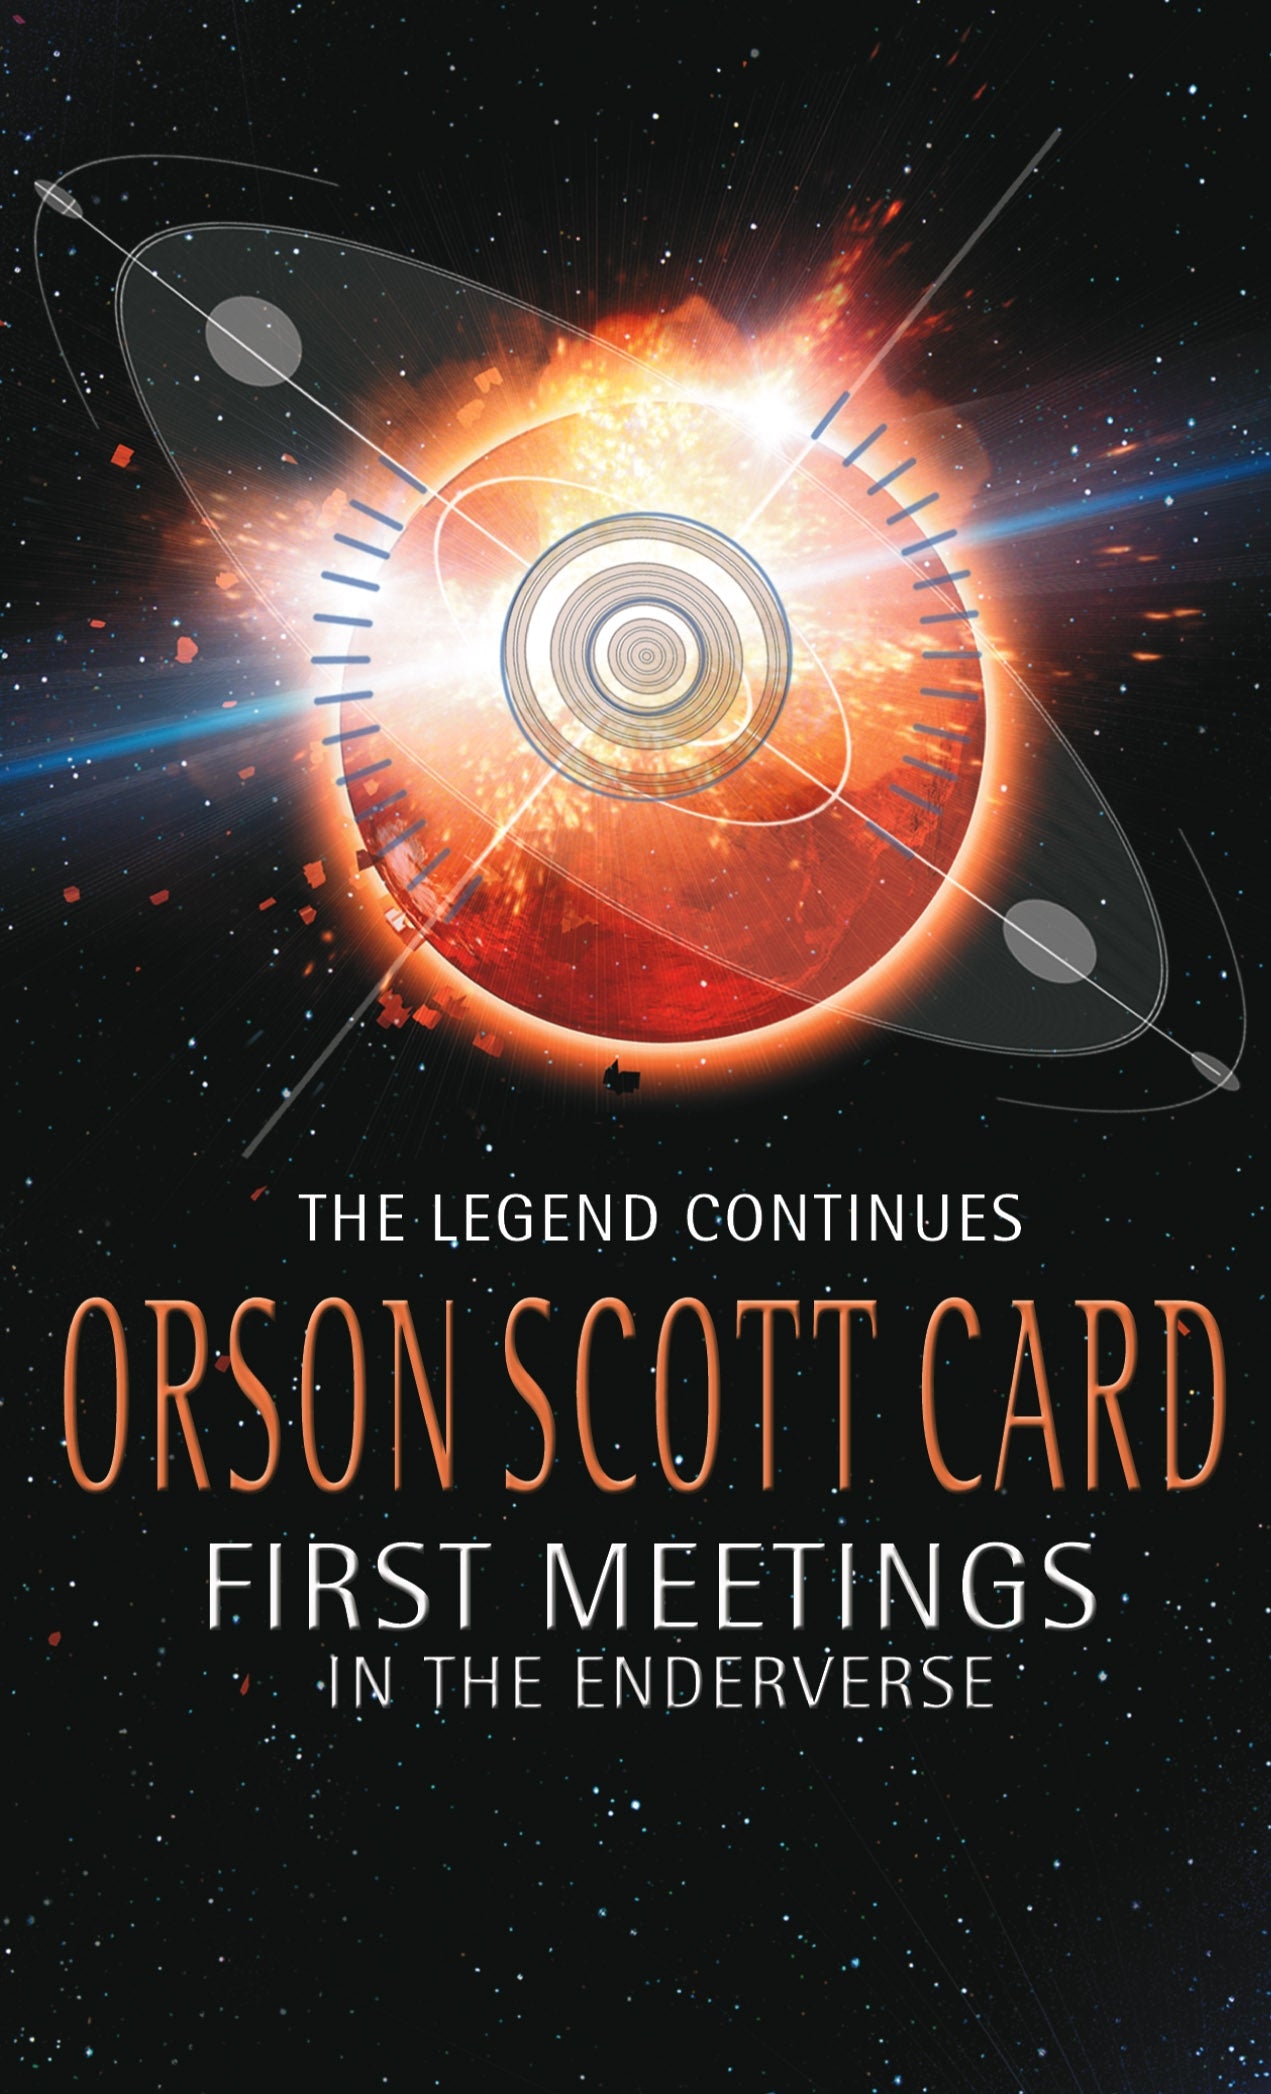 First Meetings: In The Enderverse by Orson Scott Card